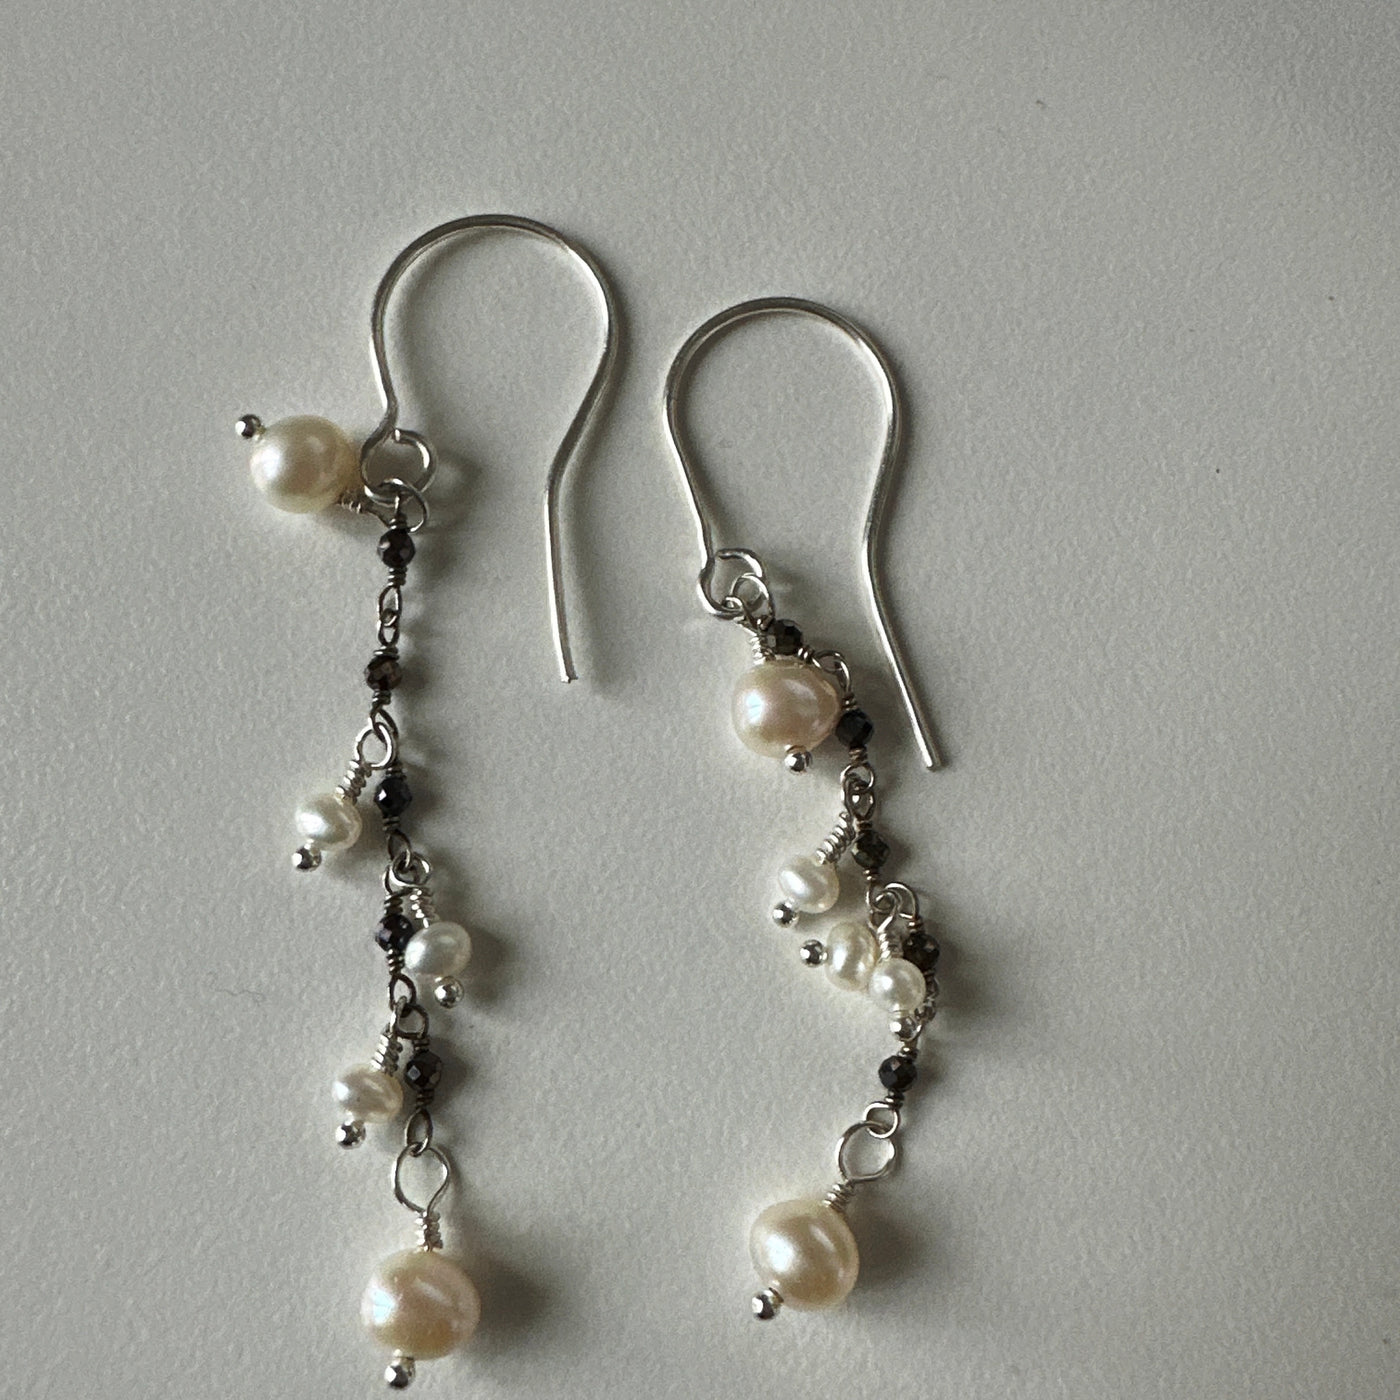 Freshwater oval and potato pearls on silver earrings